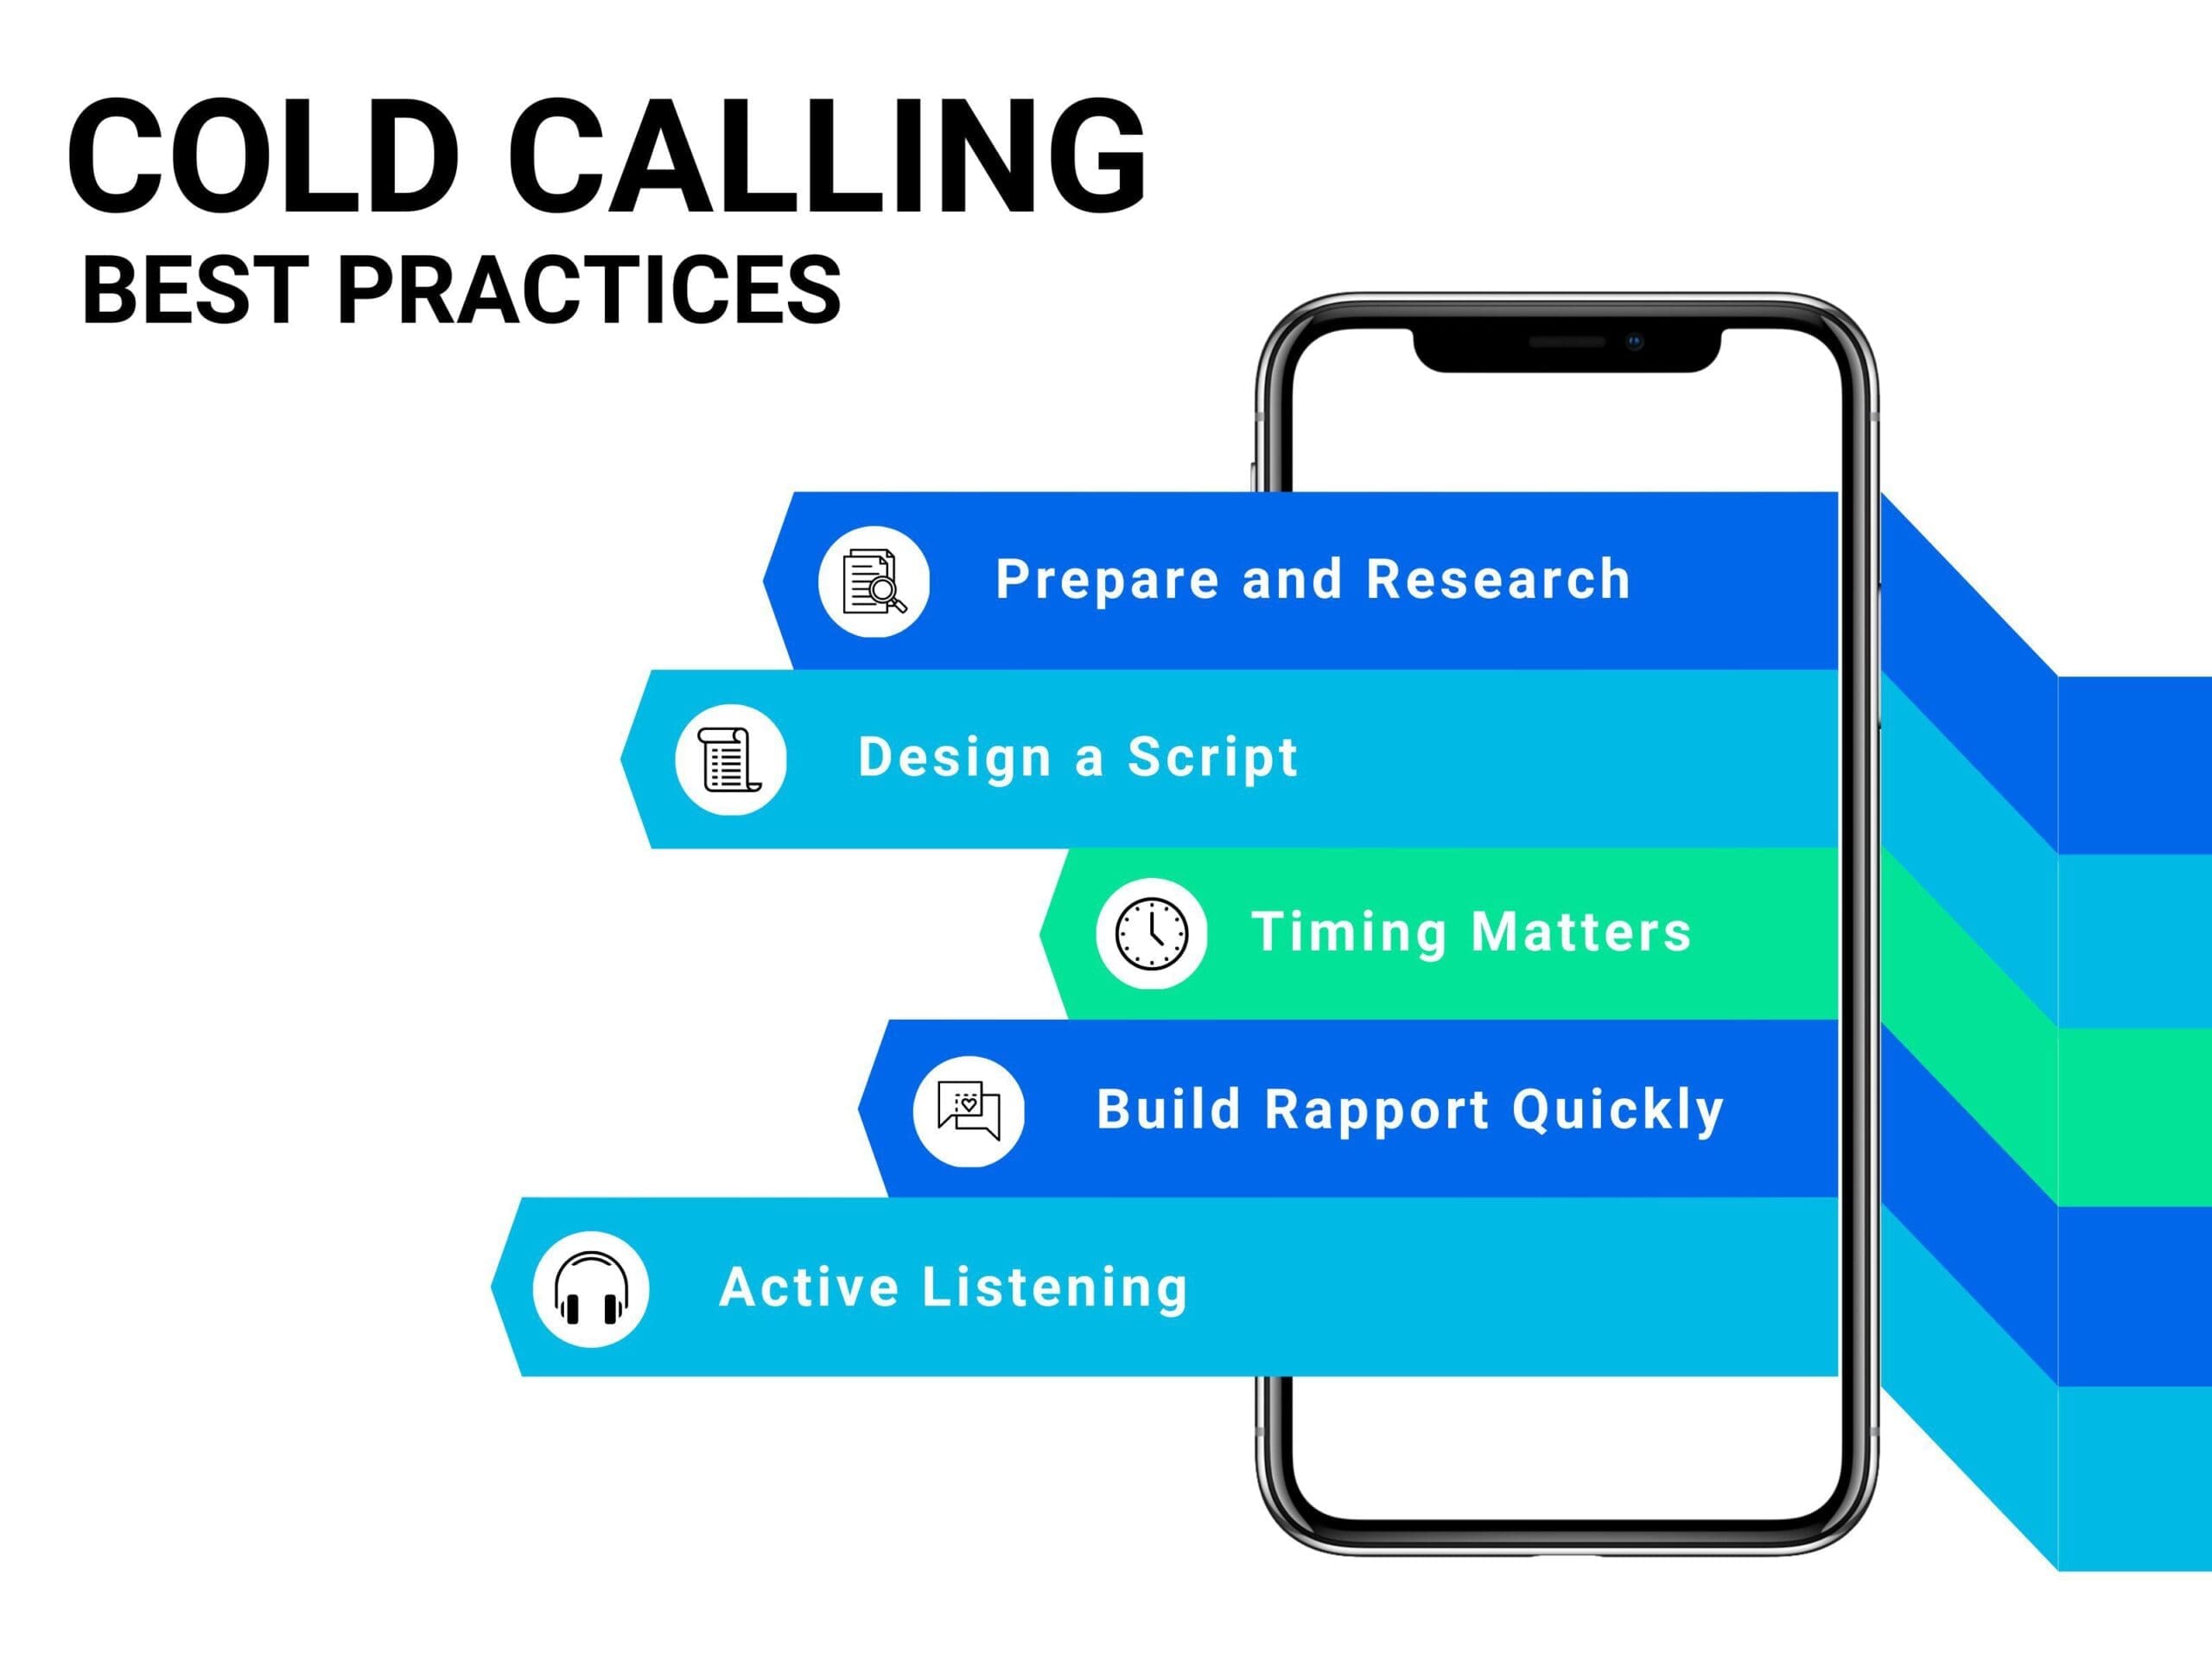 Cold calling best practices